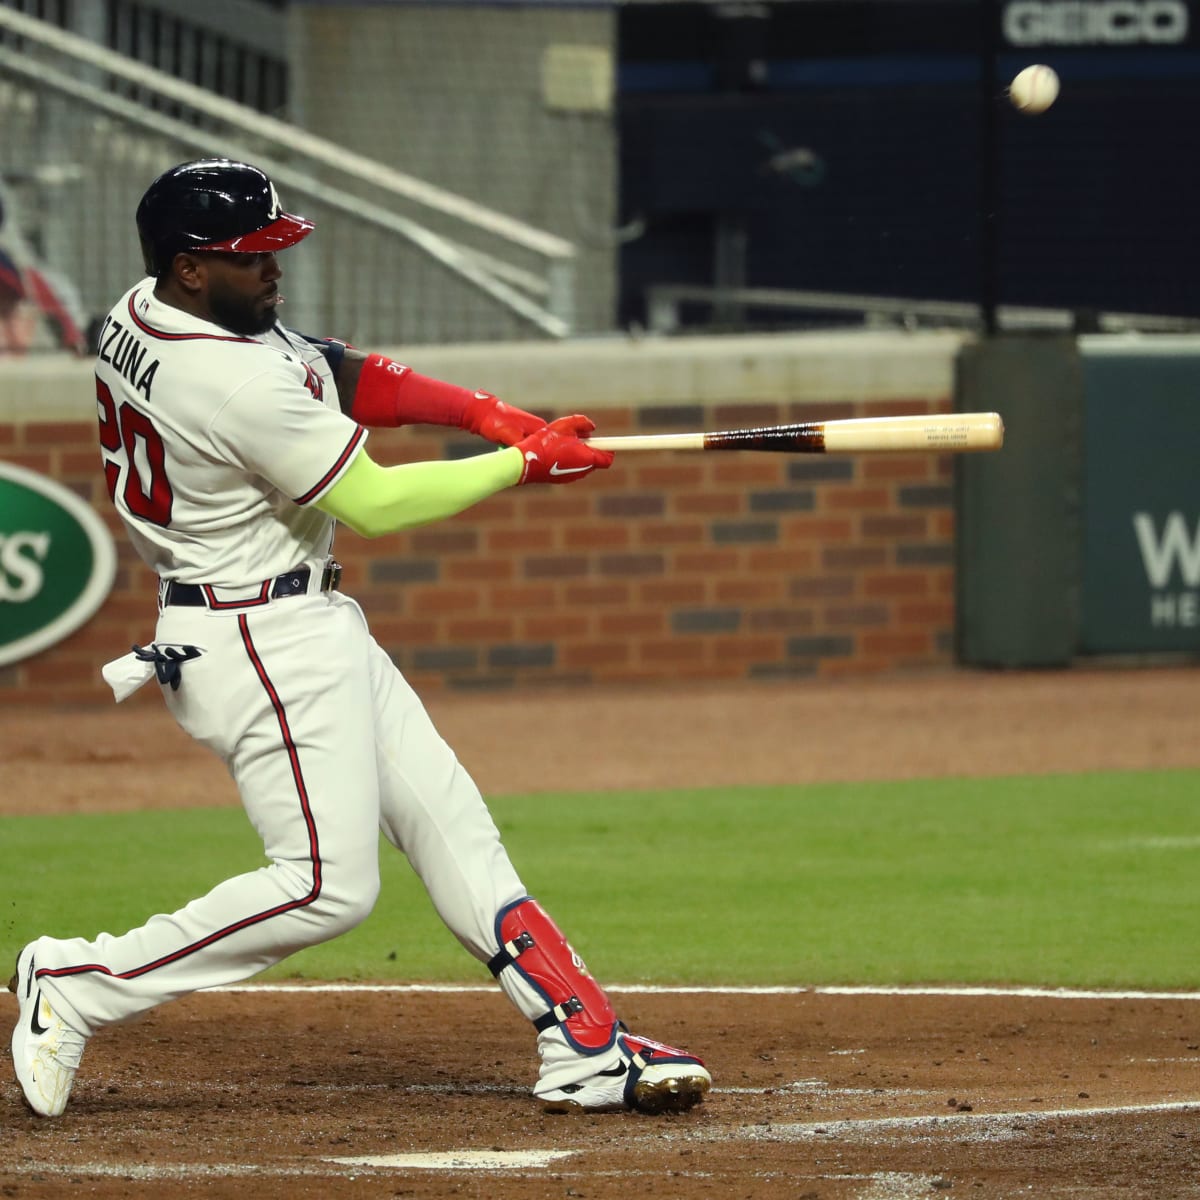 Anything From Marcell Ozuna Will Help The Atlanta Braves - ATL Day